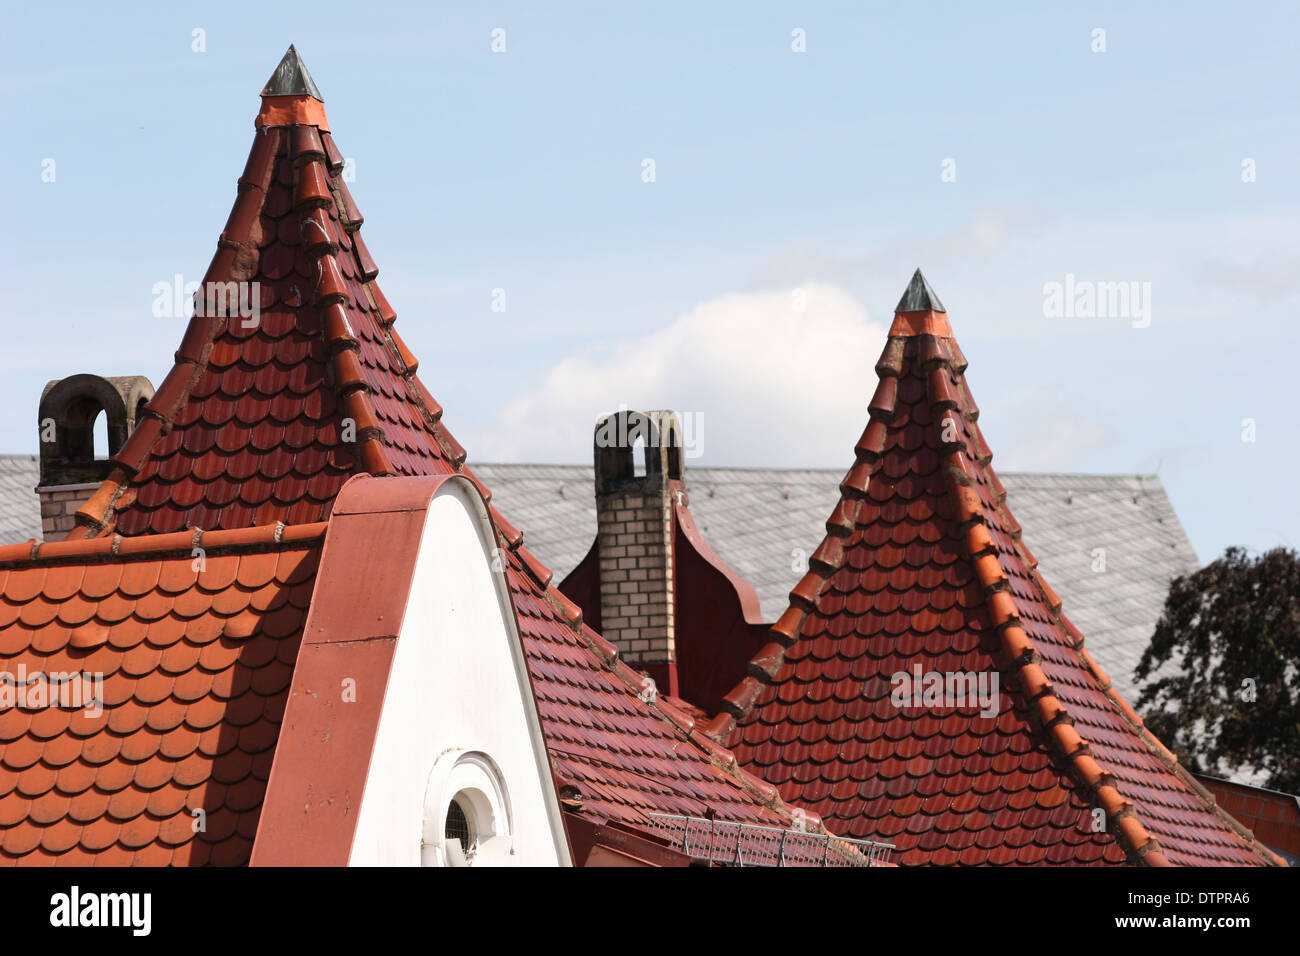 Roofs in Bad Kissingen, Germany Stock Photo